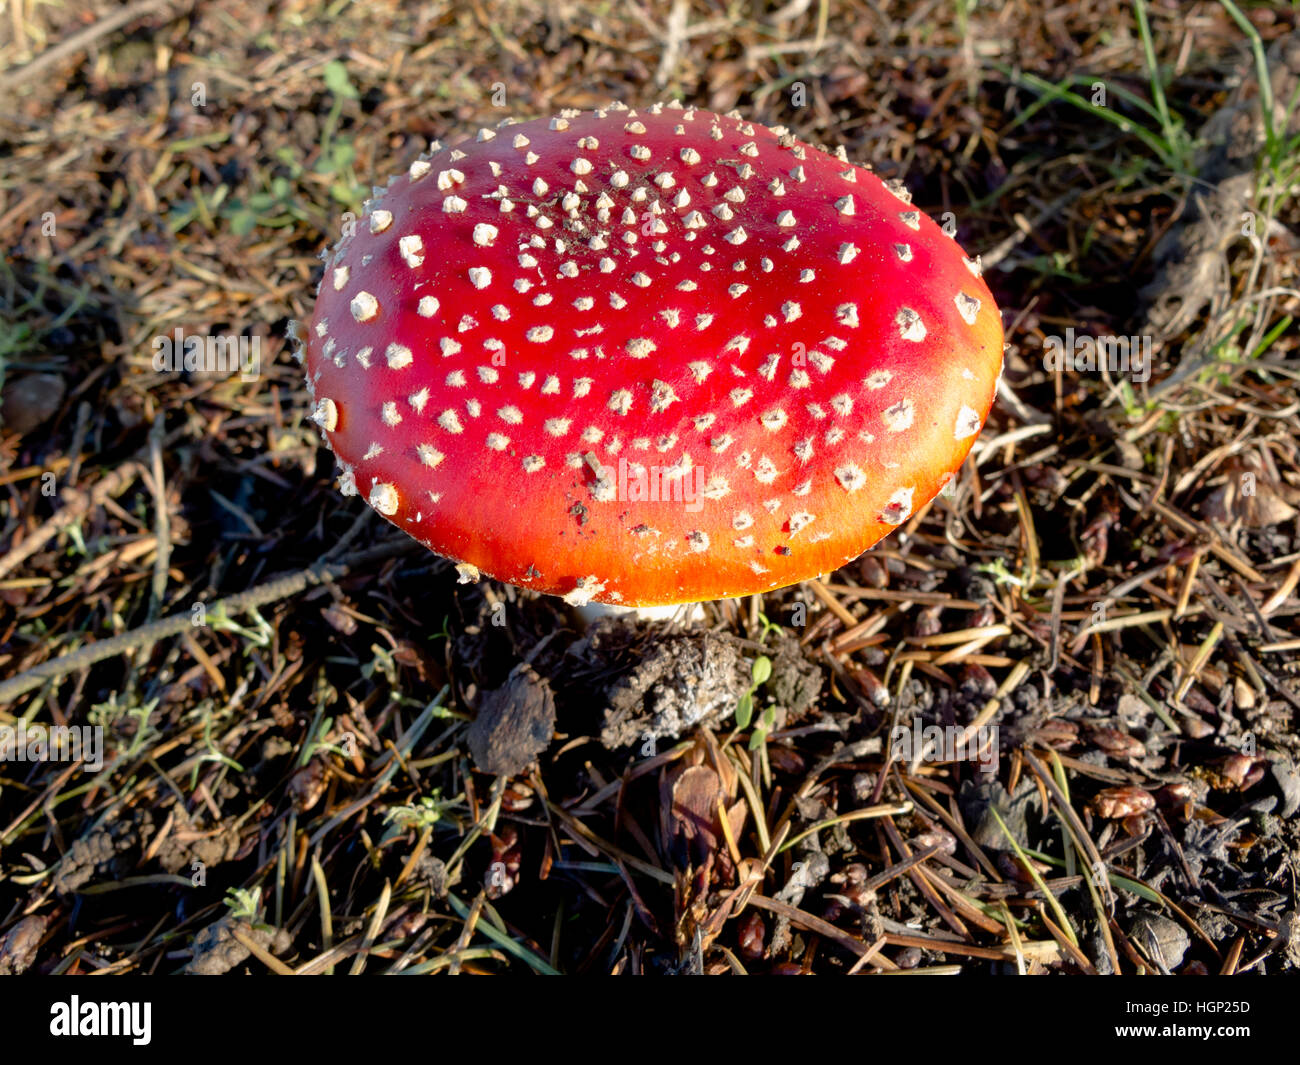 Amanita muscaria commonly known as the fly agaric or fly amanita, is a mushroom and psychoactive basidiomycete fungus. Stock Photo